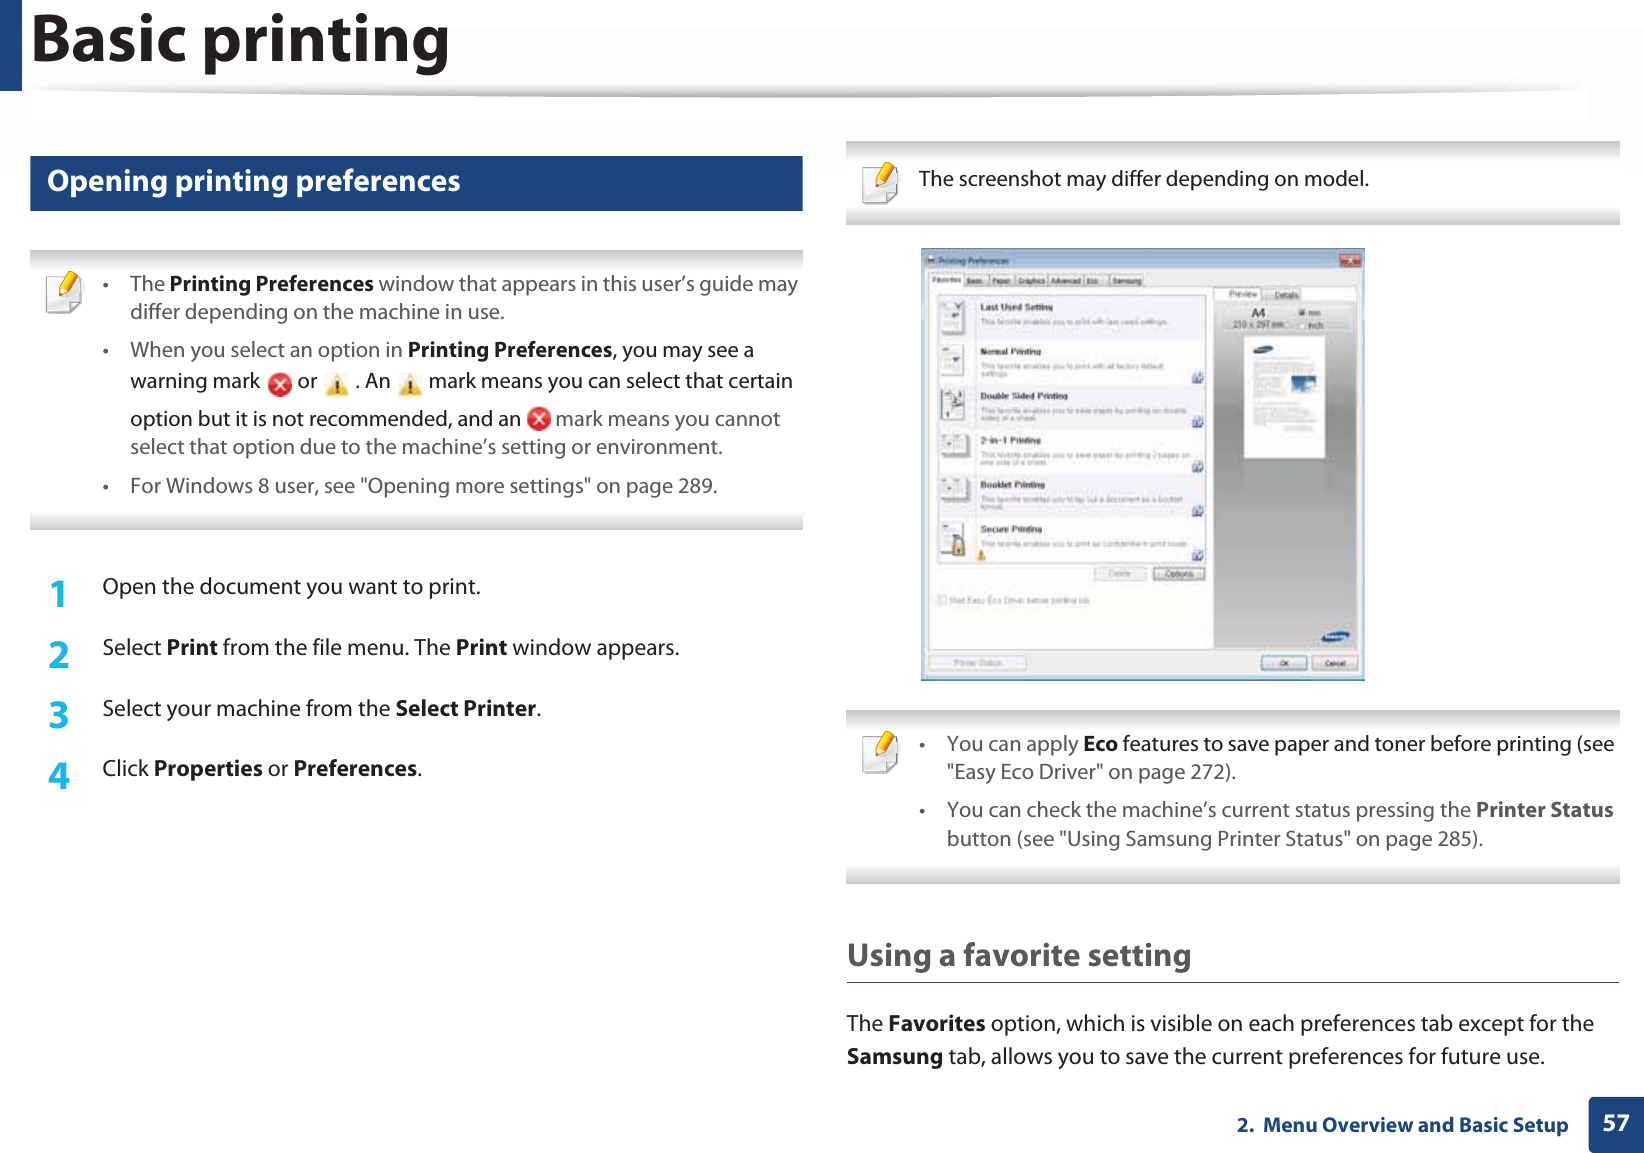 Basic printing572.  Menu Overview and Basic Setup12 Opening printing preferences • The Printing Preferences window that appears in this user’s guide may differ depending on the machine in use. • When you select an option in Printing Preferences, you may see a warning mark   or   . An   mark means you can select that certain option but it is not recommended, and an   mark means you cannot select that option due to the machine’s setting or environment.• For Windows 8 user, see &quot;Opening more settings&quot; on page 289. 1Open the document you want to print.2  Select Print from the file menu. The Print window appears. 3  Select your machine from the Select Printer. 4  Click Properties or Preferences.  The screenshot may differ depending on model.  • You can apply Eco features to save paper and toner before printing (see &quot;Easy Eco Driver&quot; on page 272).• You can check the machine’s current status pressing the Printer Status button (see &quot;Using Samsung Printer Status&quot; on page 285). Using a favorite settingThe Favorites option, which is visible on each preferences tab except for the Samsung tab, allows you to save the current preferences for future use.